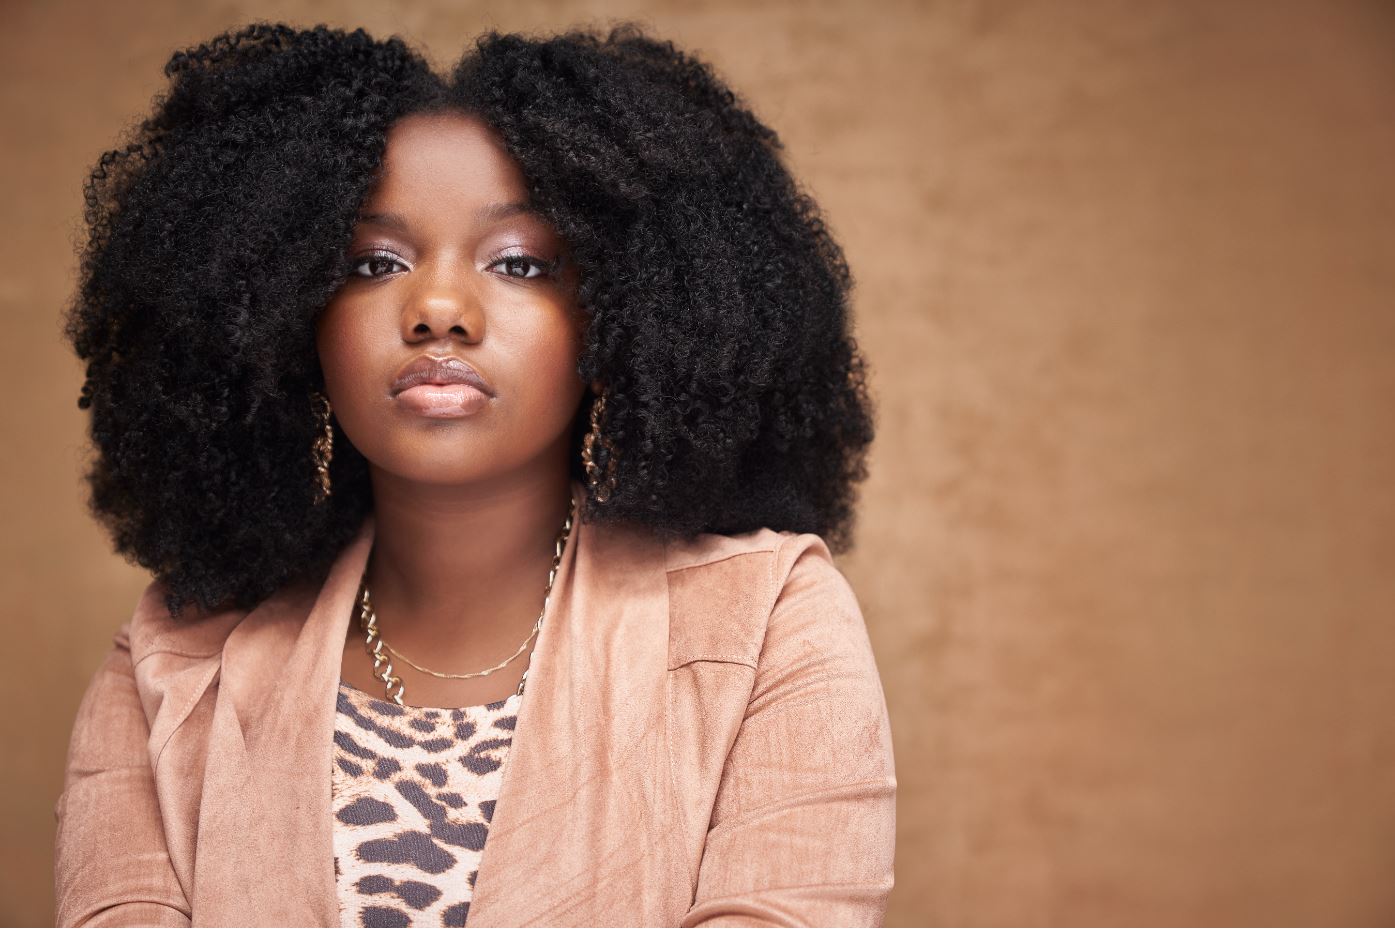 Exclusive: Bria Danielle Singleton Stars in Netflix's "Thunder Force" with Octavia Spencer and Melissa McCarthy